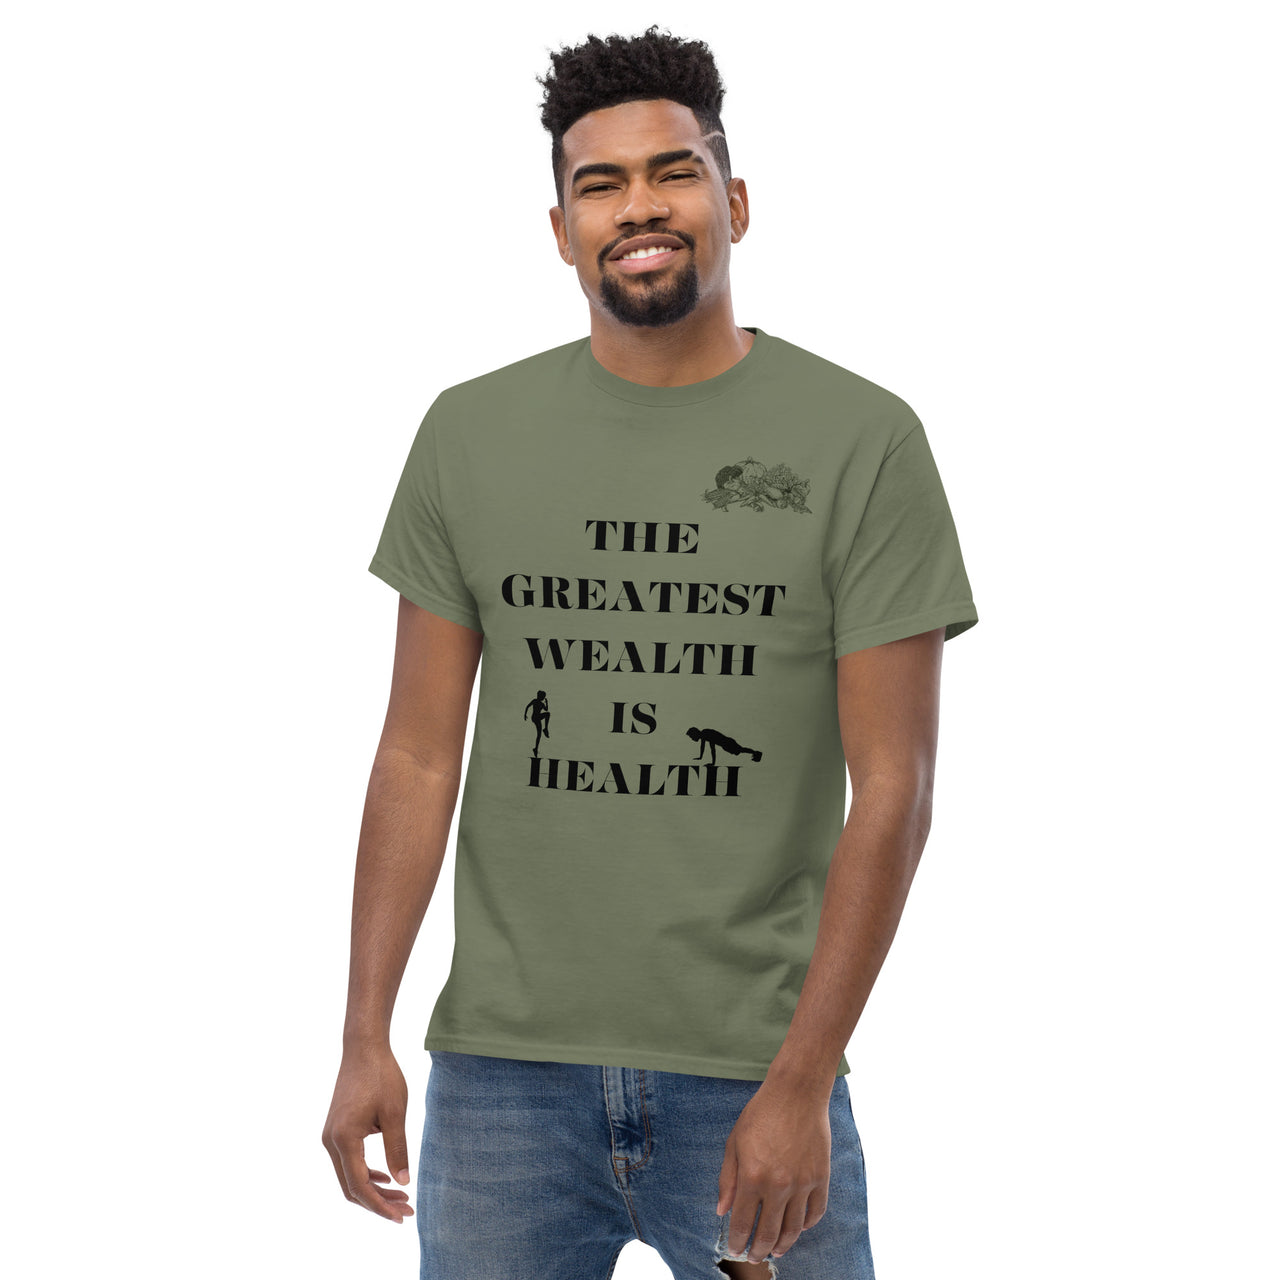 Health Is Wealth Healthy Eating Healthy Lifestyle Vegan Vegetarian Fitness Workout Tshirt